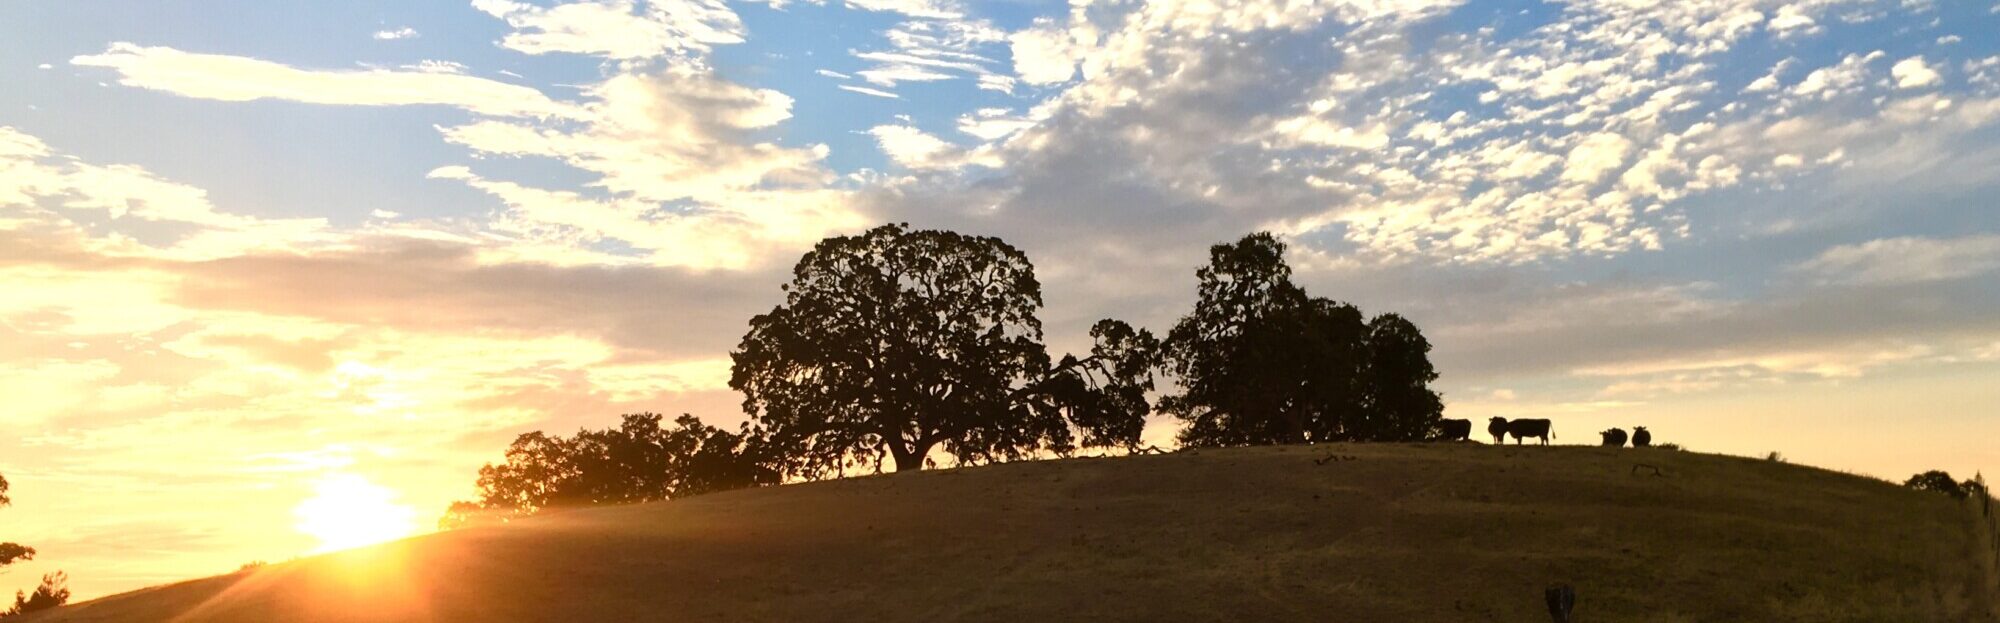 Golden hill at sunset, with oak trees silhouetted against a light blue sky with white clouds. A few cattle are on the hilltop.